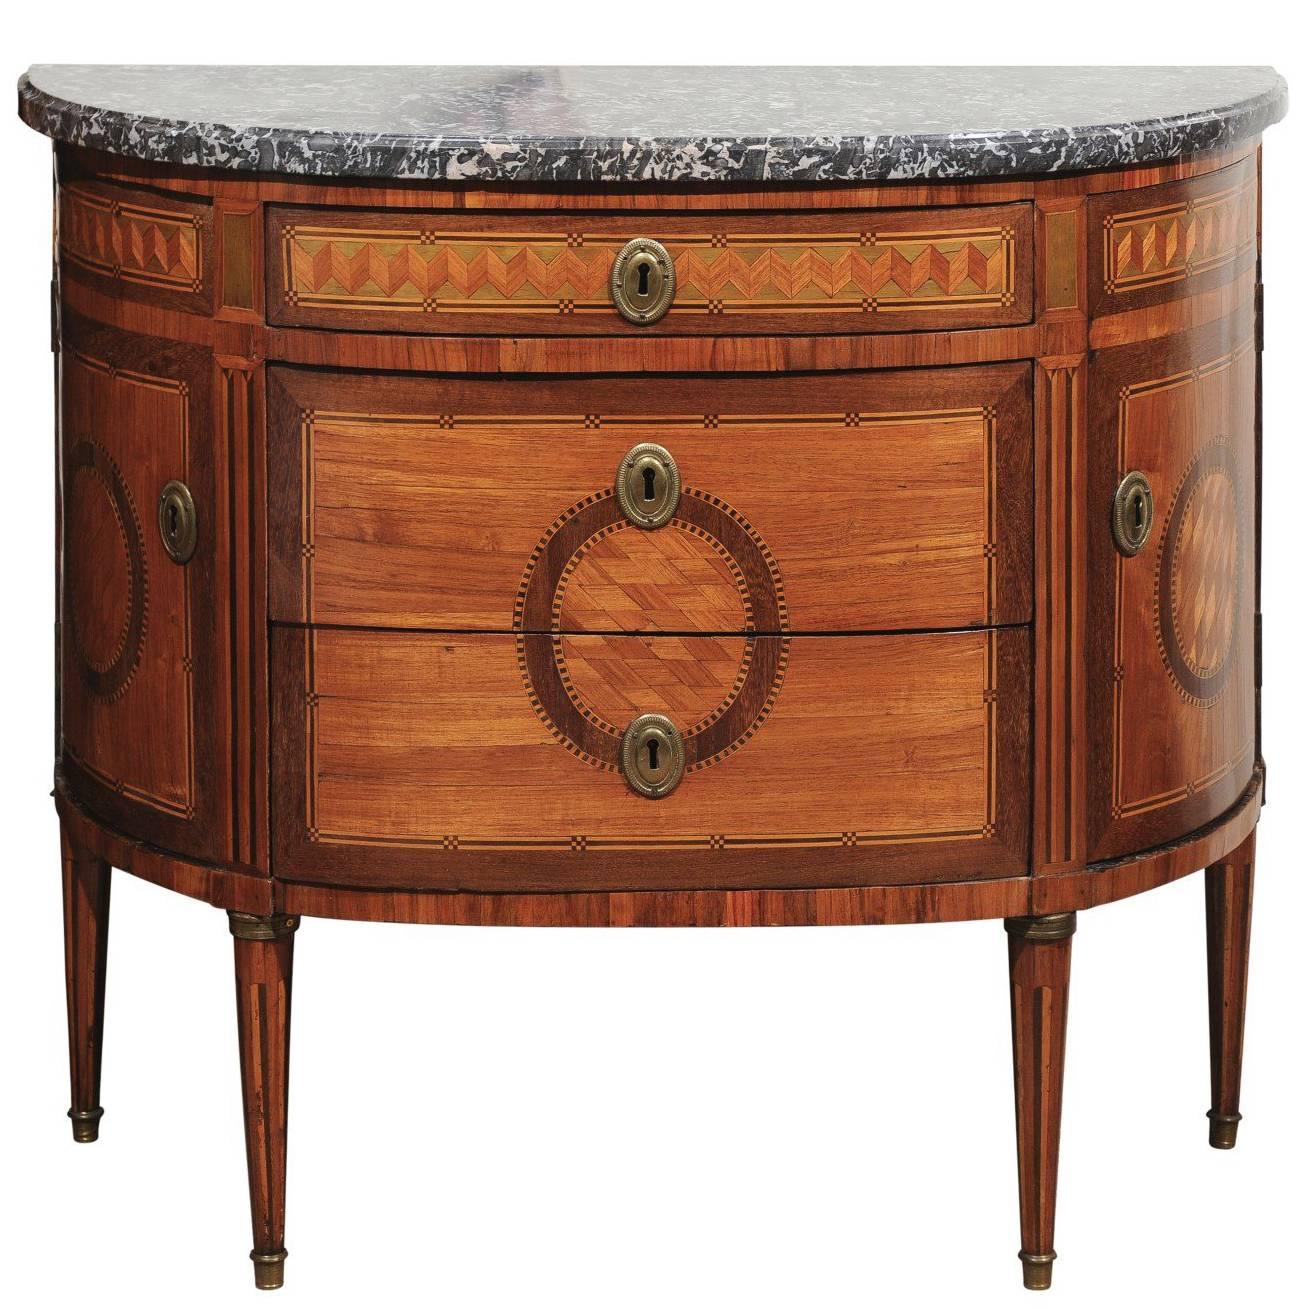 18th Century Louis XVI Demilune Parquetry Inlaid Commode with Grey Marble Top